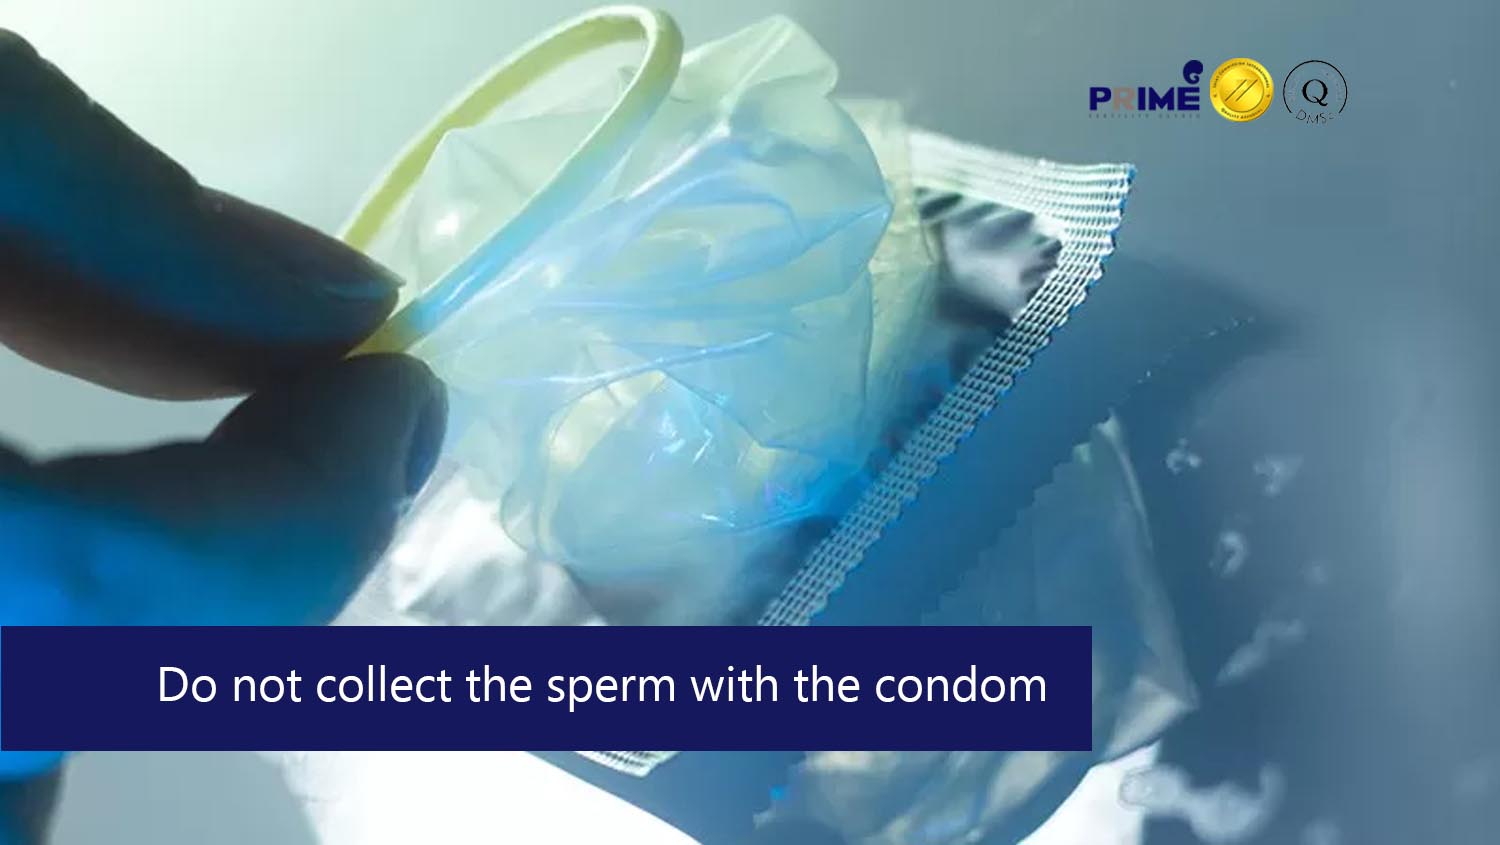 Do Not Collect Semen With The Condom How To Collect Sperm Ivf Icsi